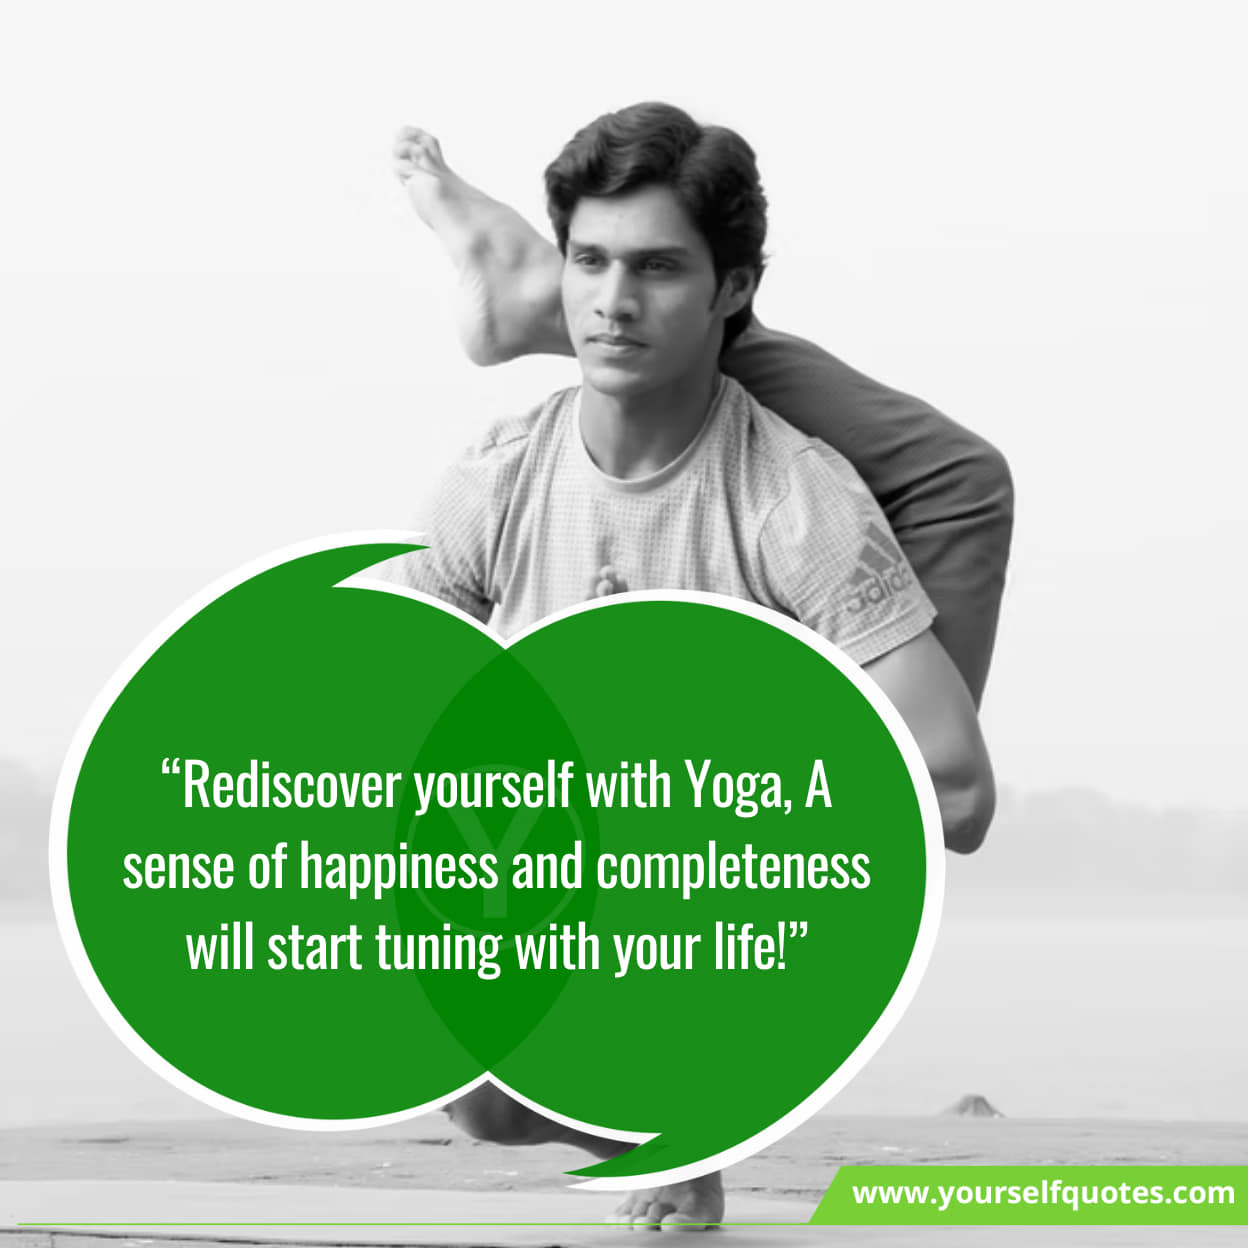 Yoga Day Quotes On Discovering Yourself